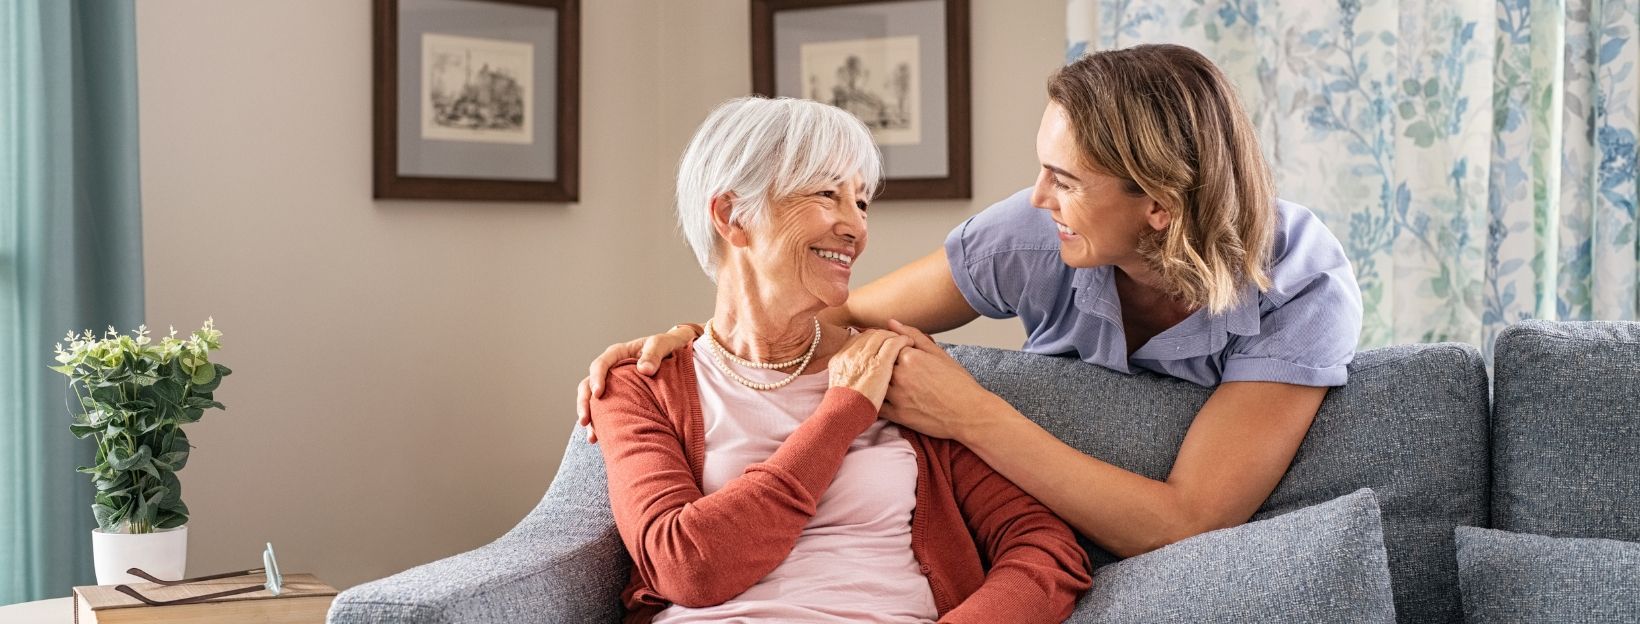 5 Essential Steps to Plan for Your Aging Parents' Care Needs